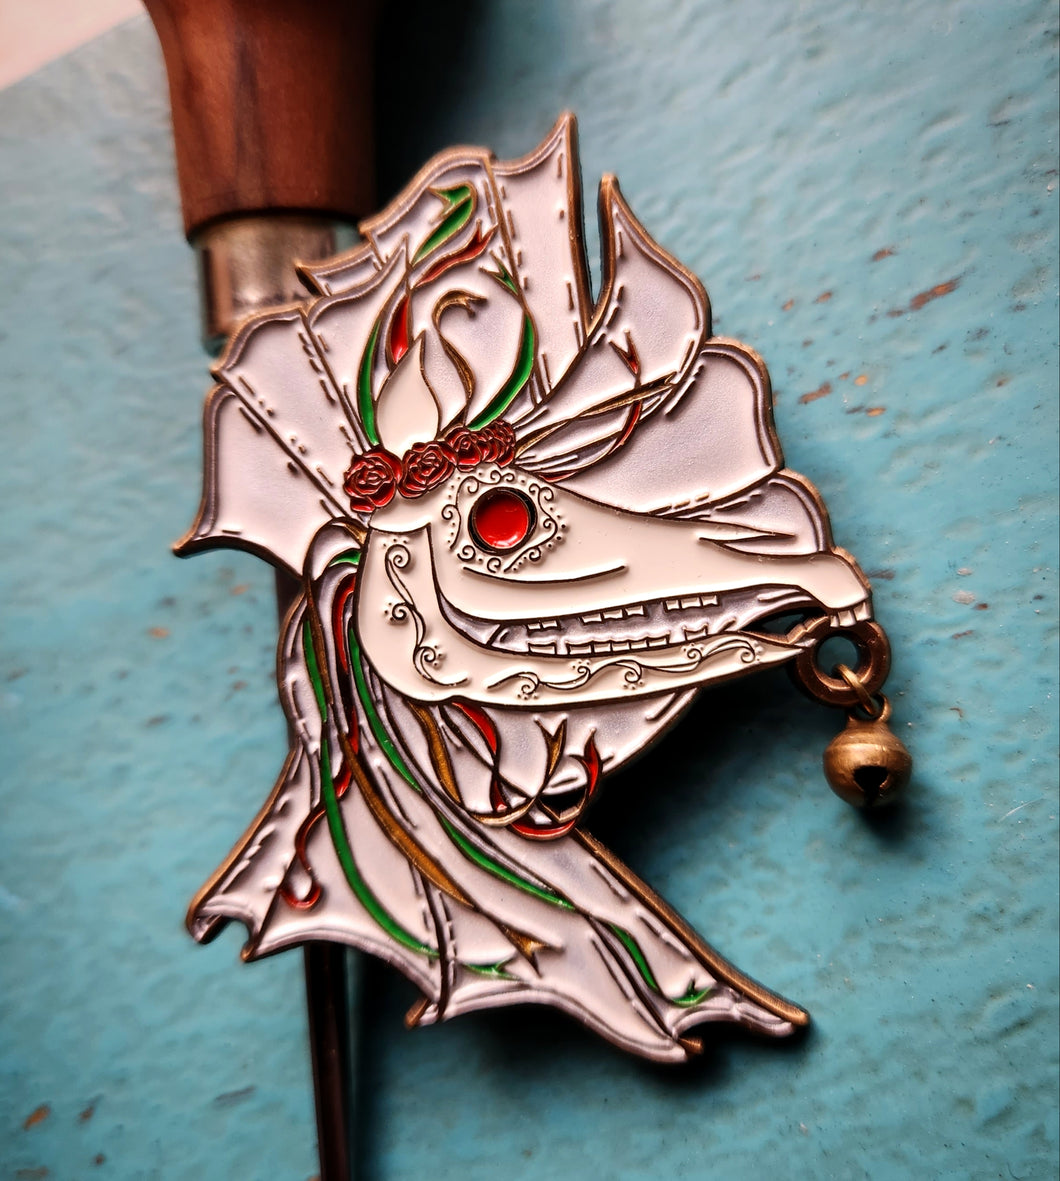 Mari Lwyd lapel pin - horse skull holding bell against white sheet with red, green, and gold ribbons